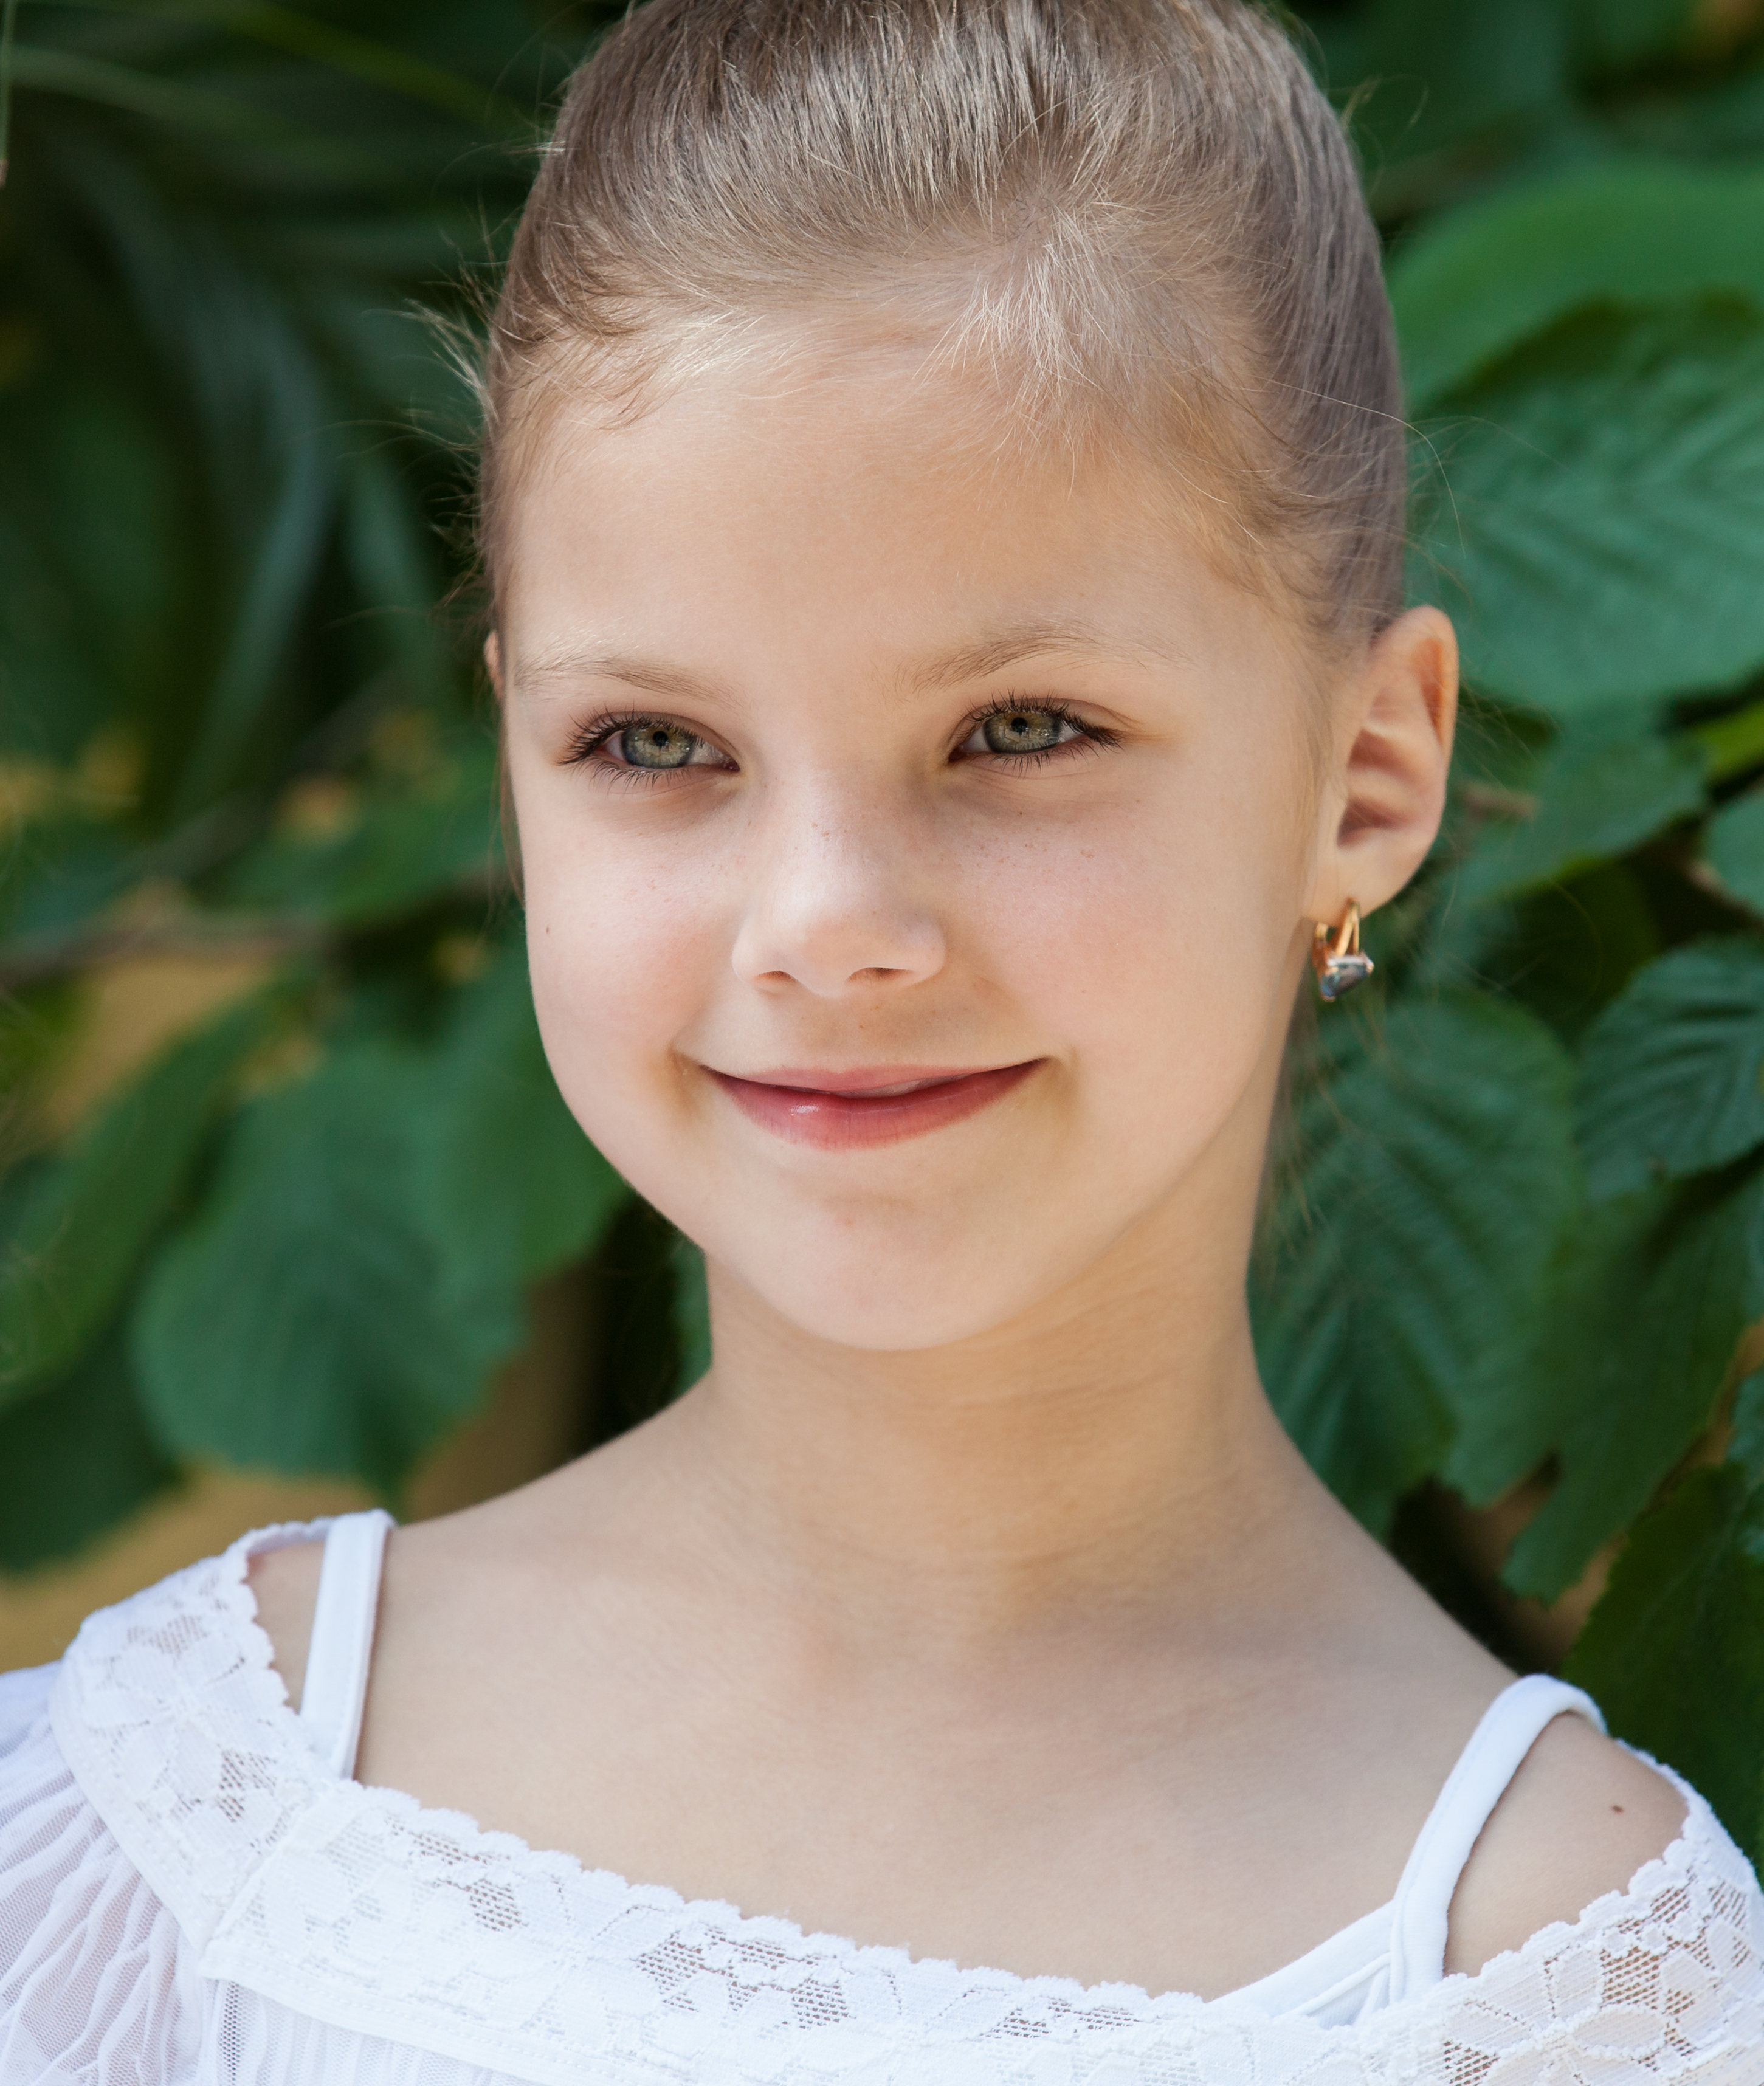 a fair-haired cute child girl photographed in June 2014, picture 1/2